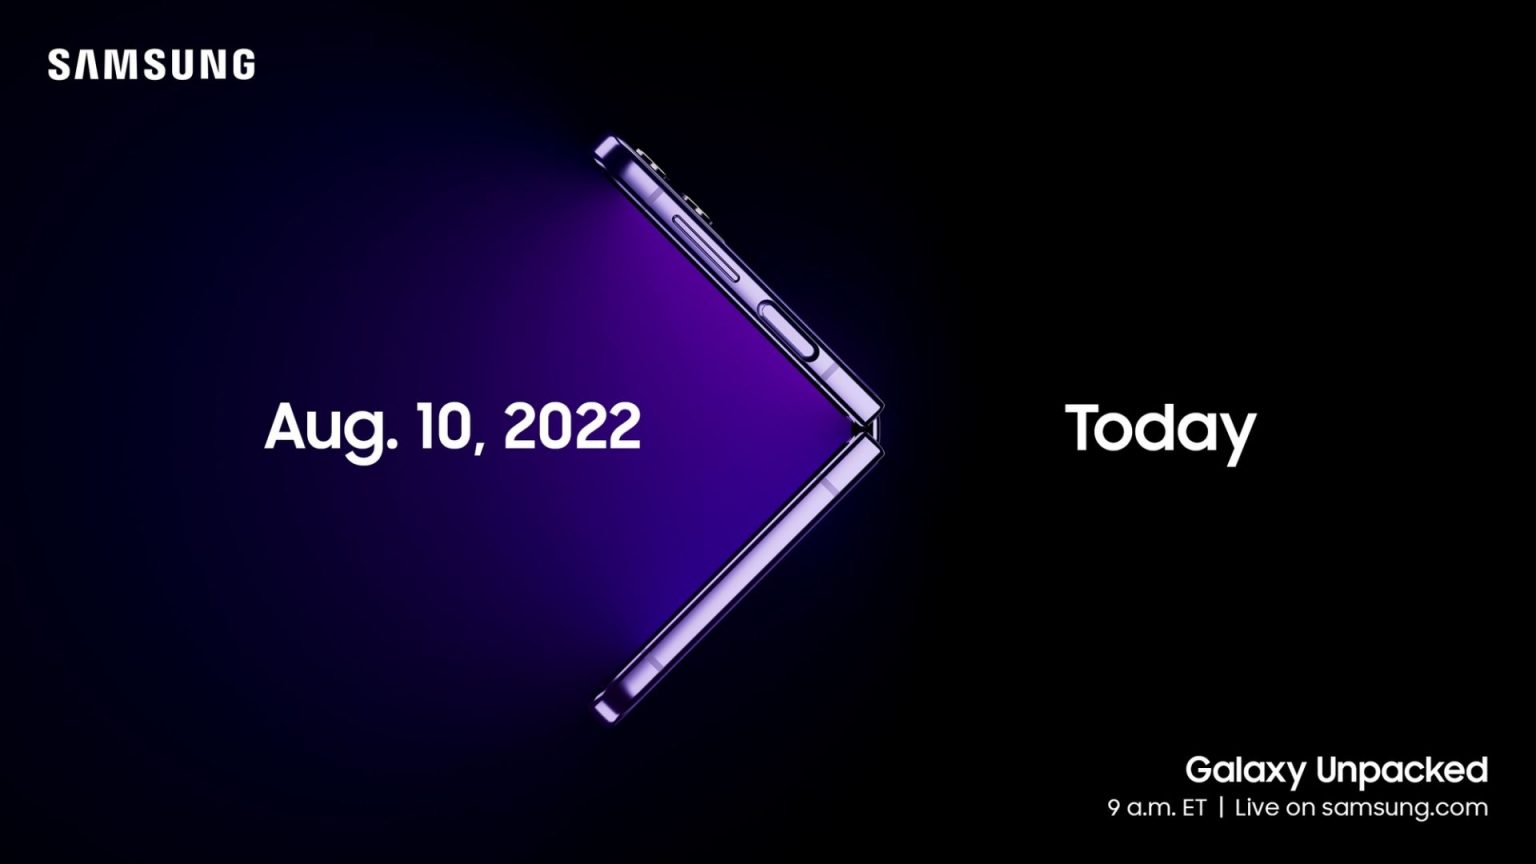 Samsung to host Galaxy Unpacked event on August 10 to launch Galaxy Z